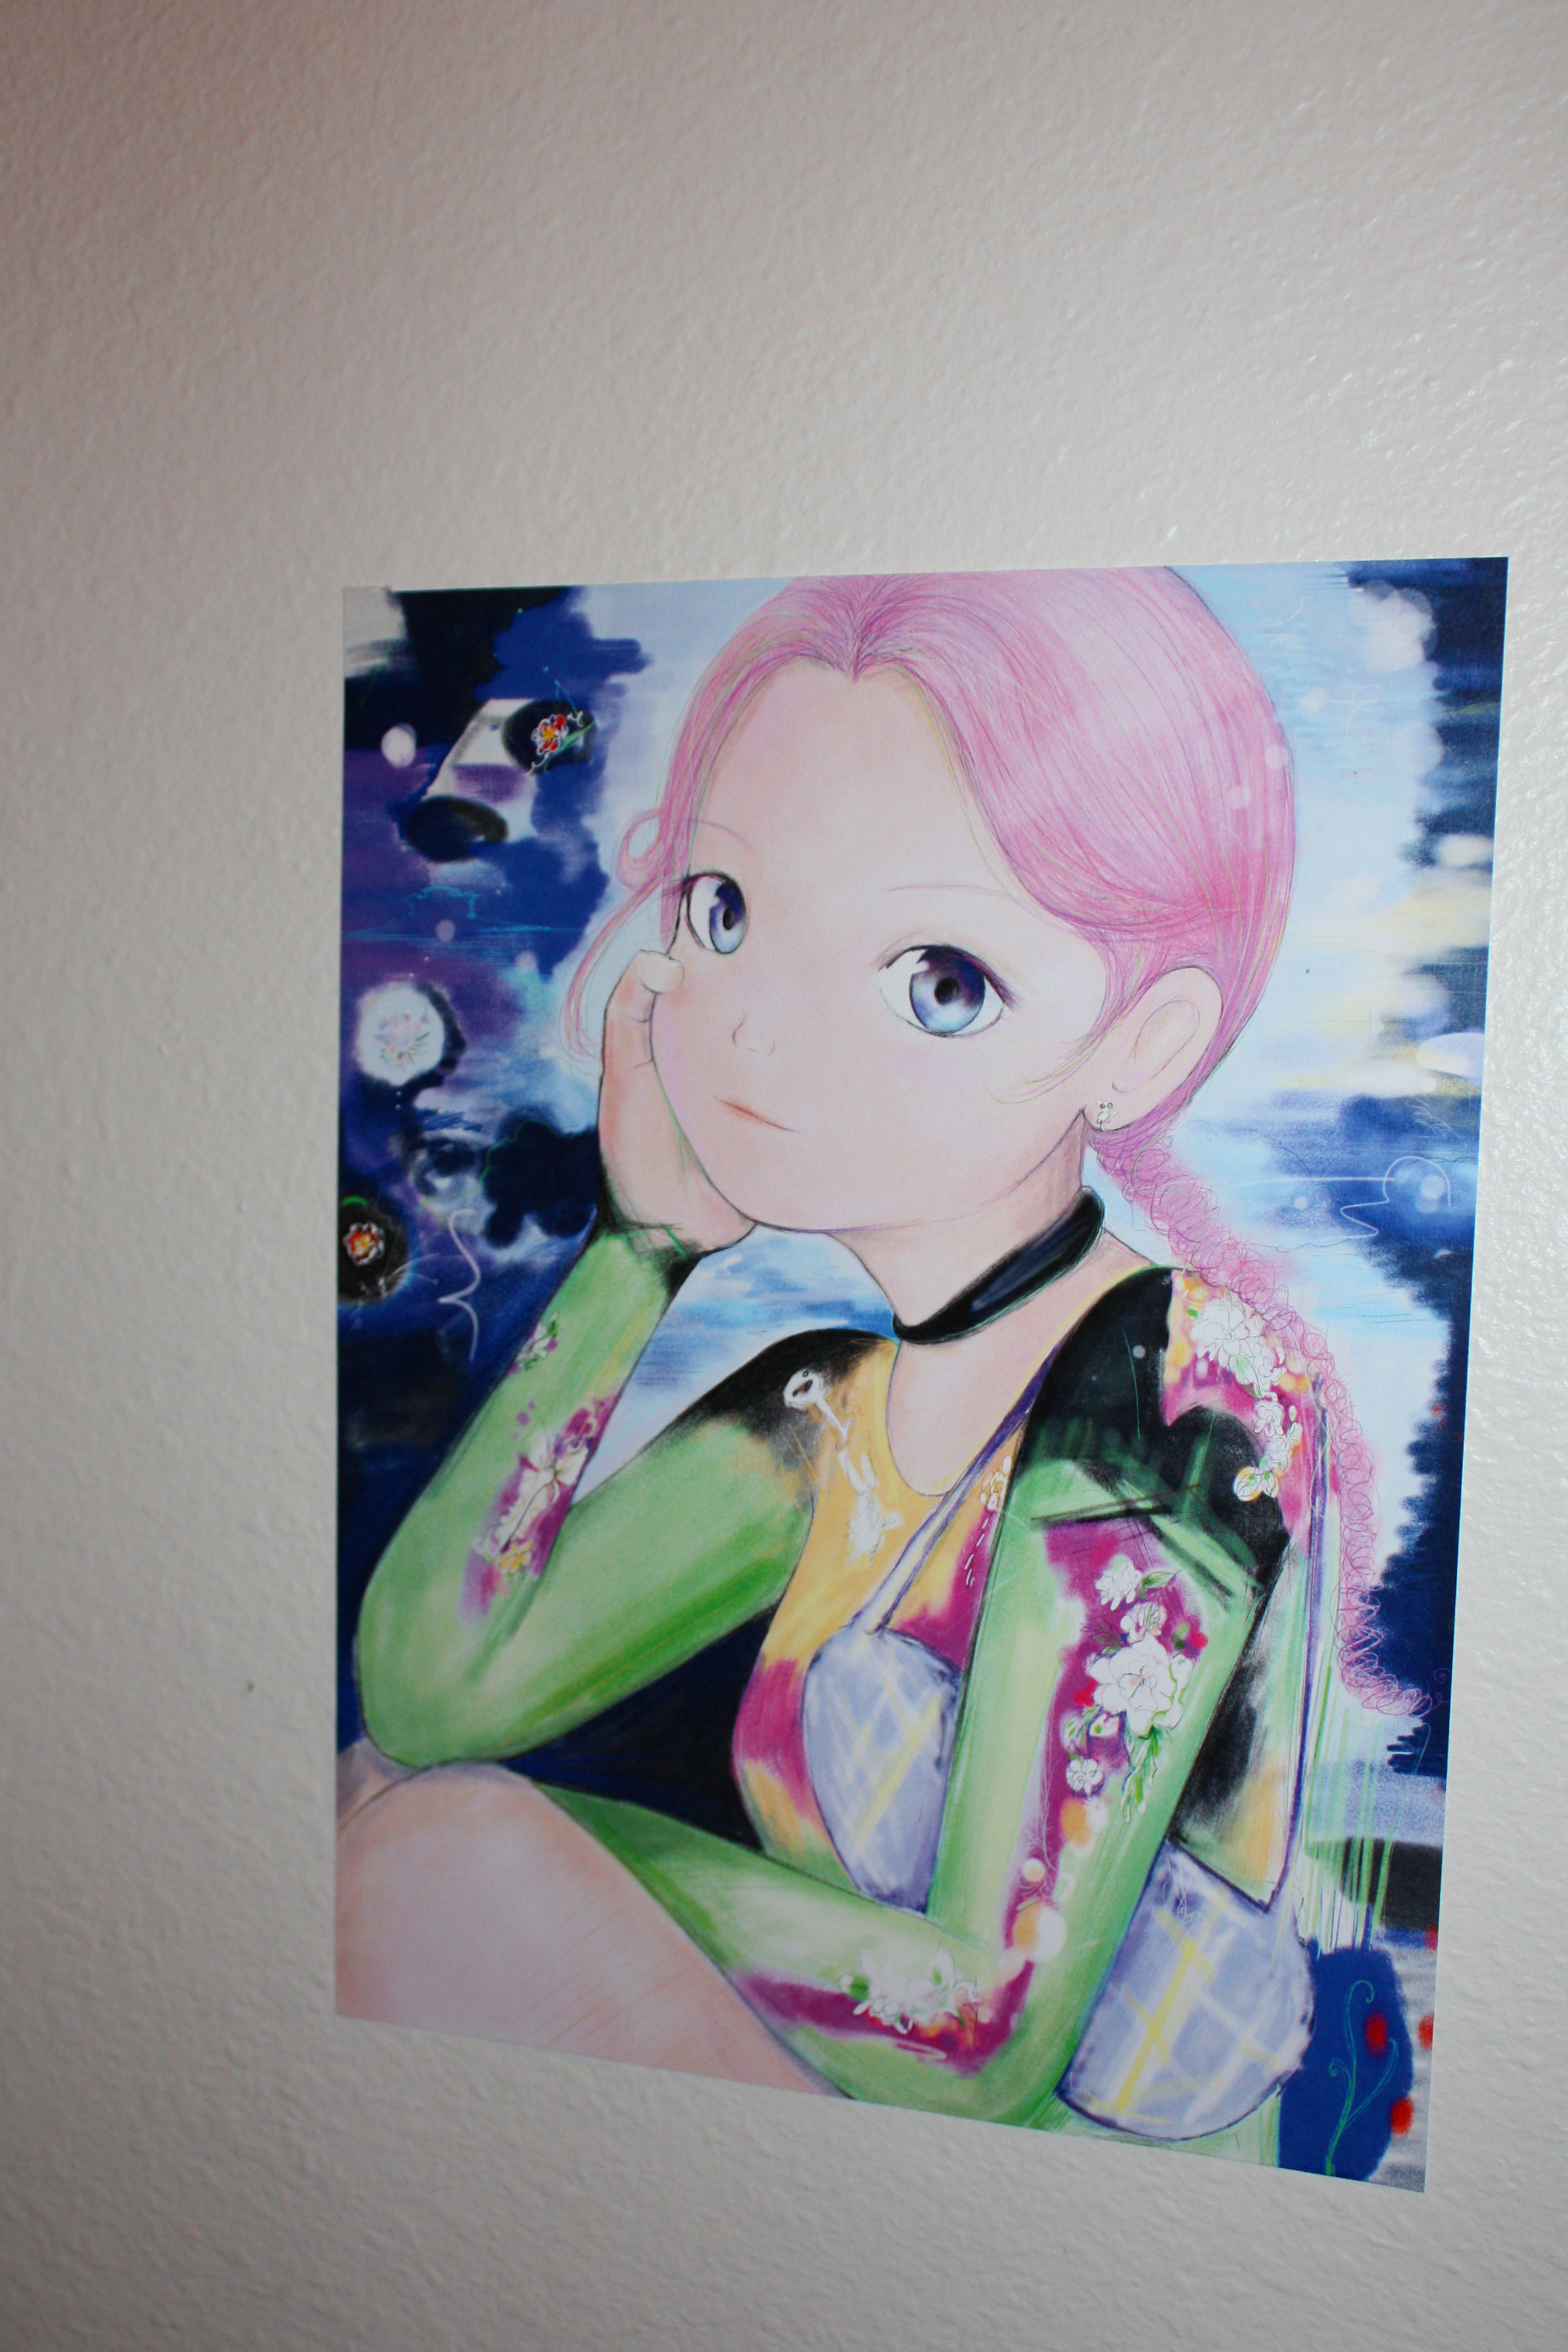 Detail of an anime girl with pink hair hung on a white wall